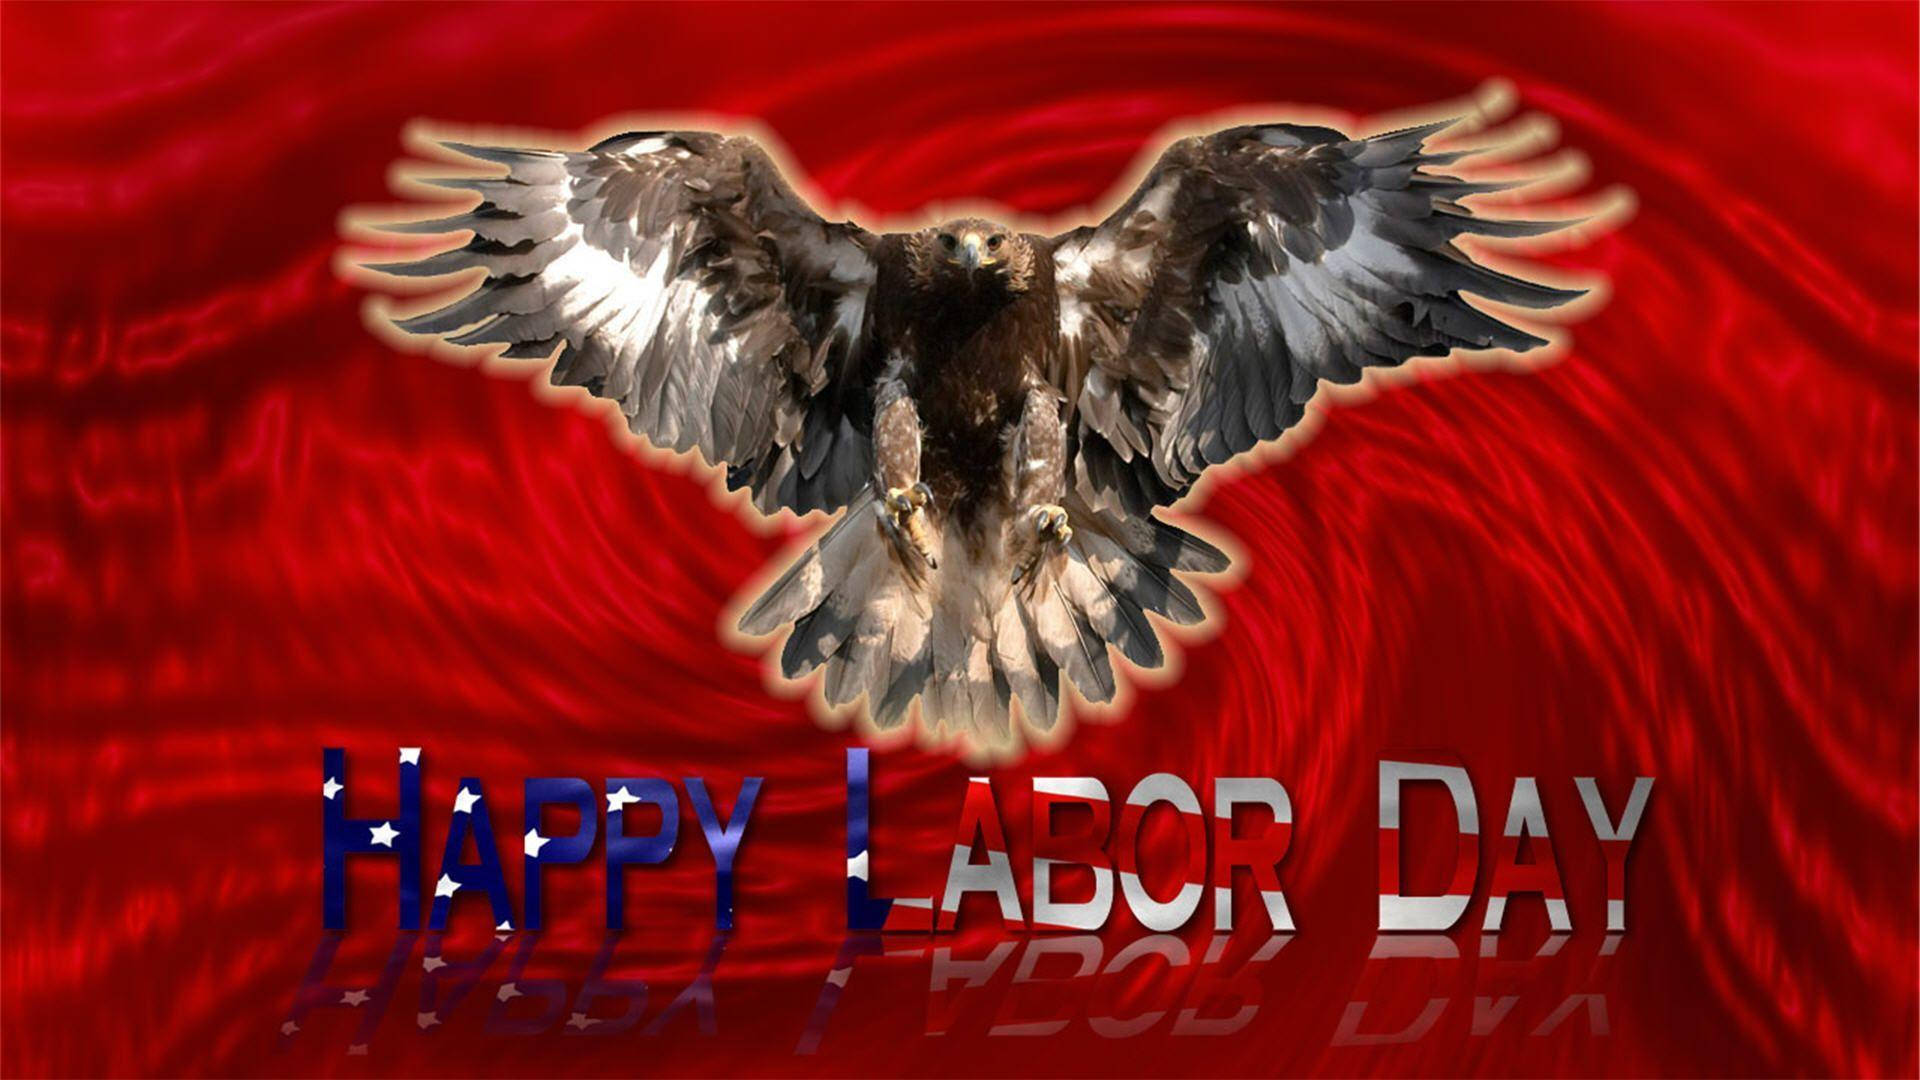 Labor Day With Eagle Digital Cover Wallpaper